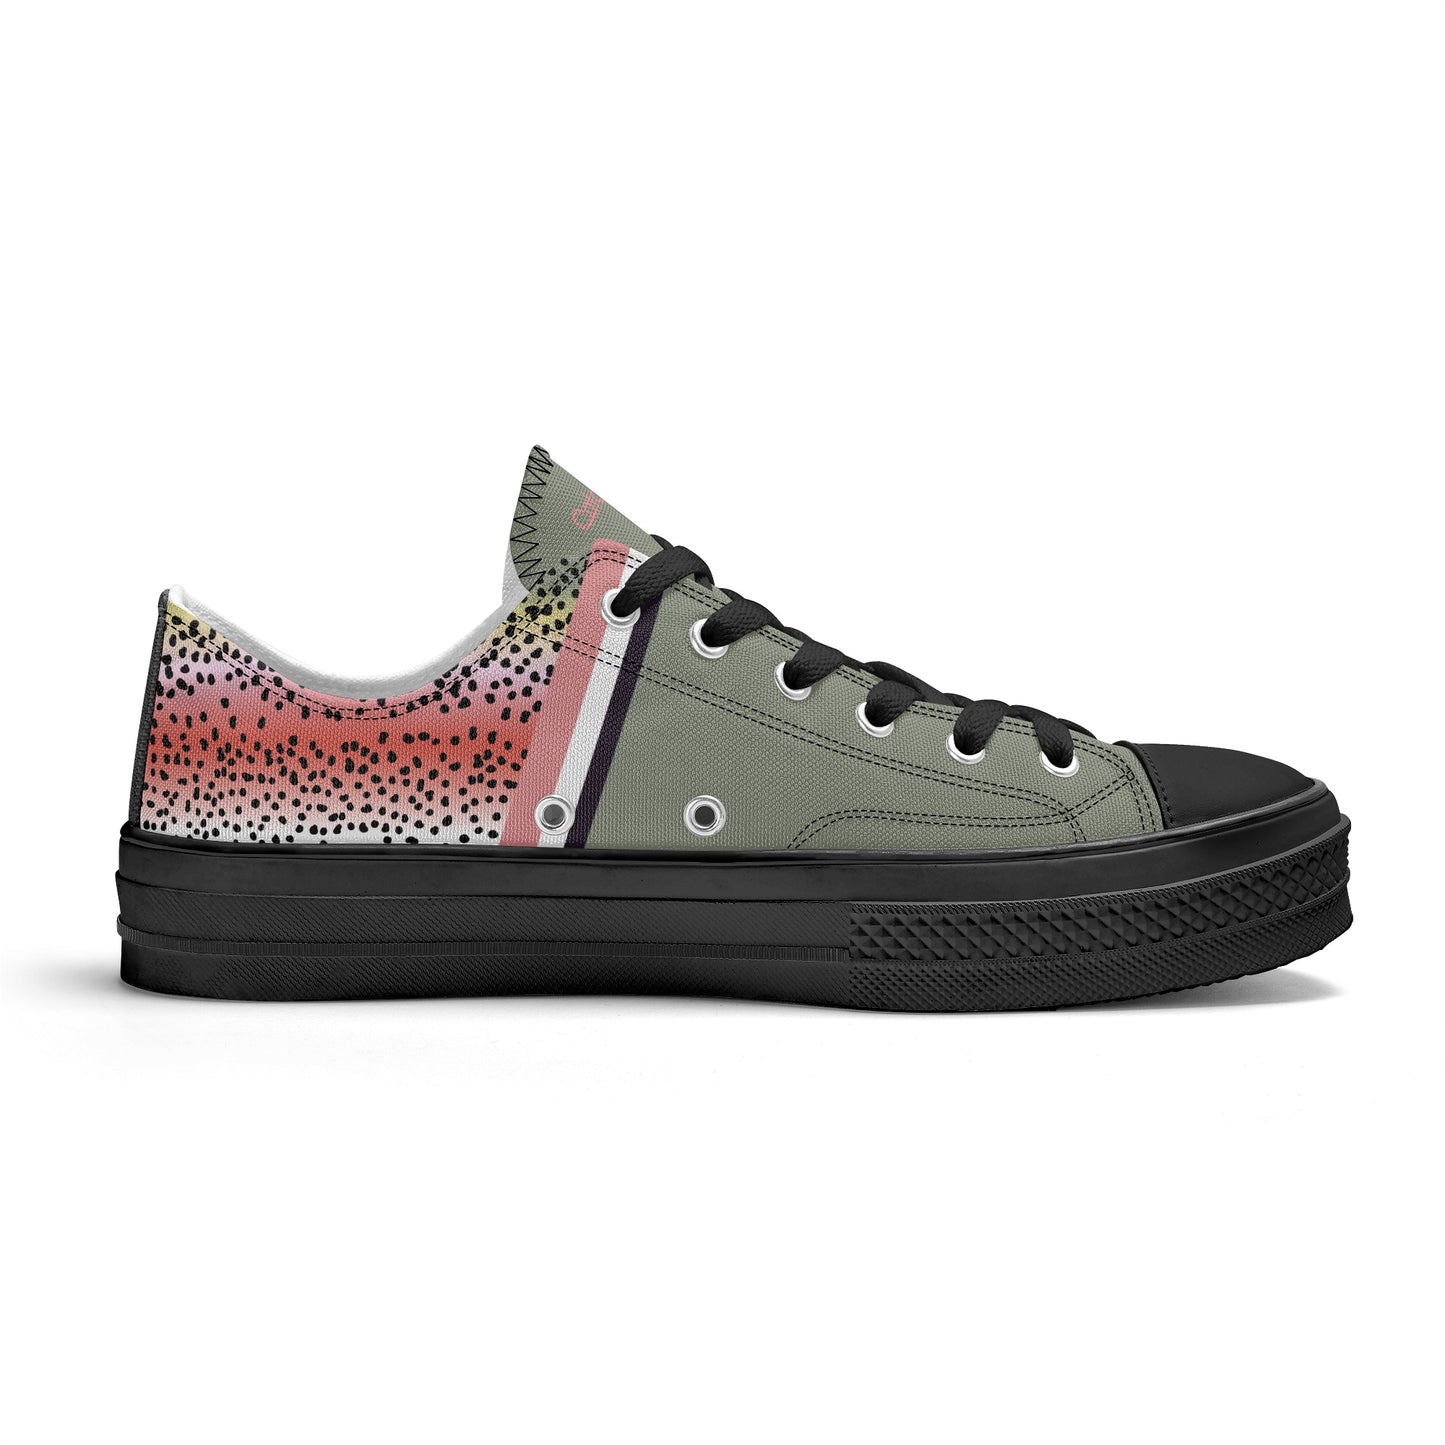 Womens Bowtown Racer Canvas Shoes